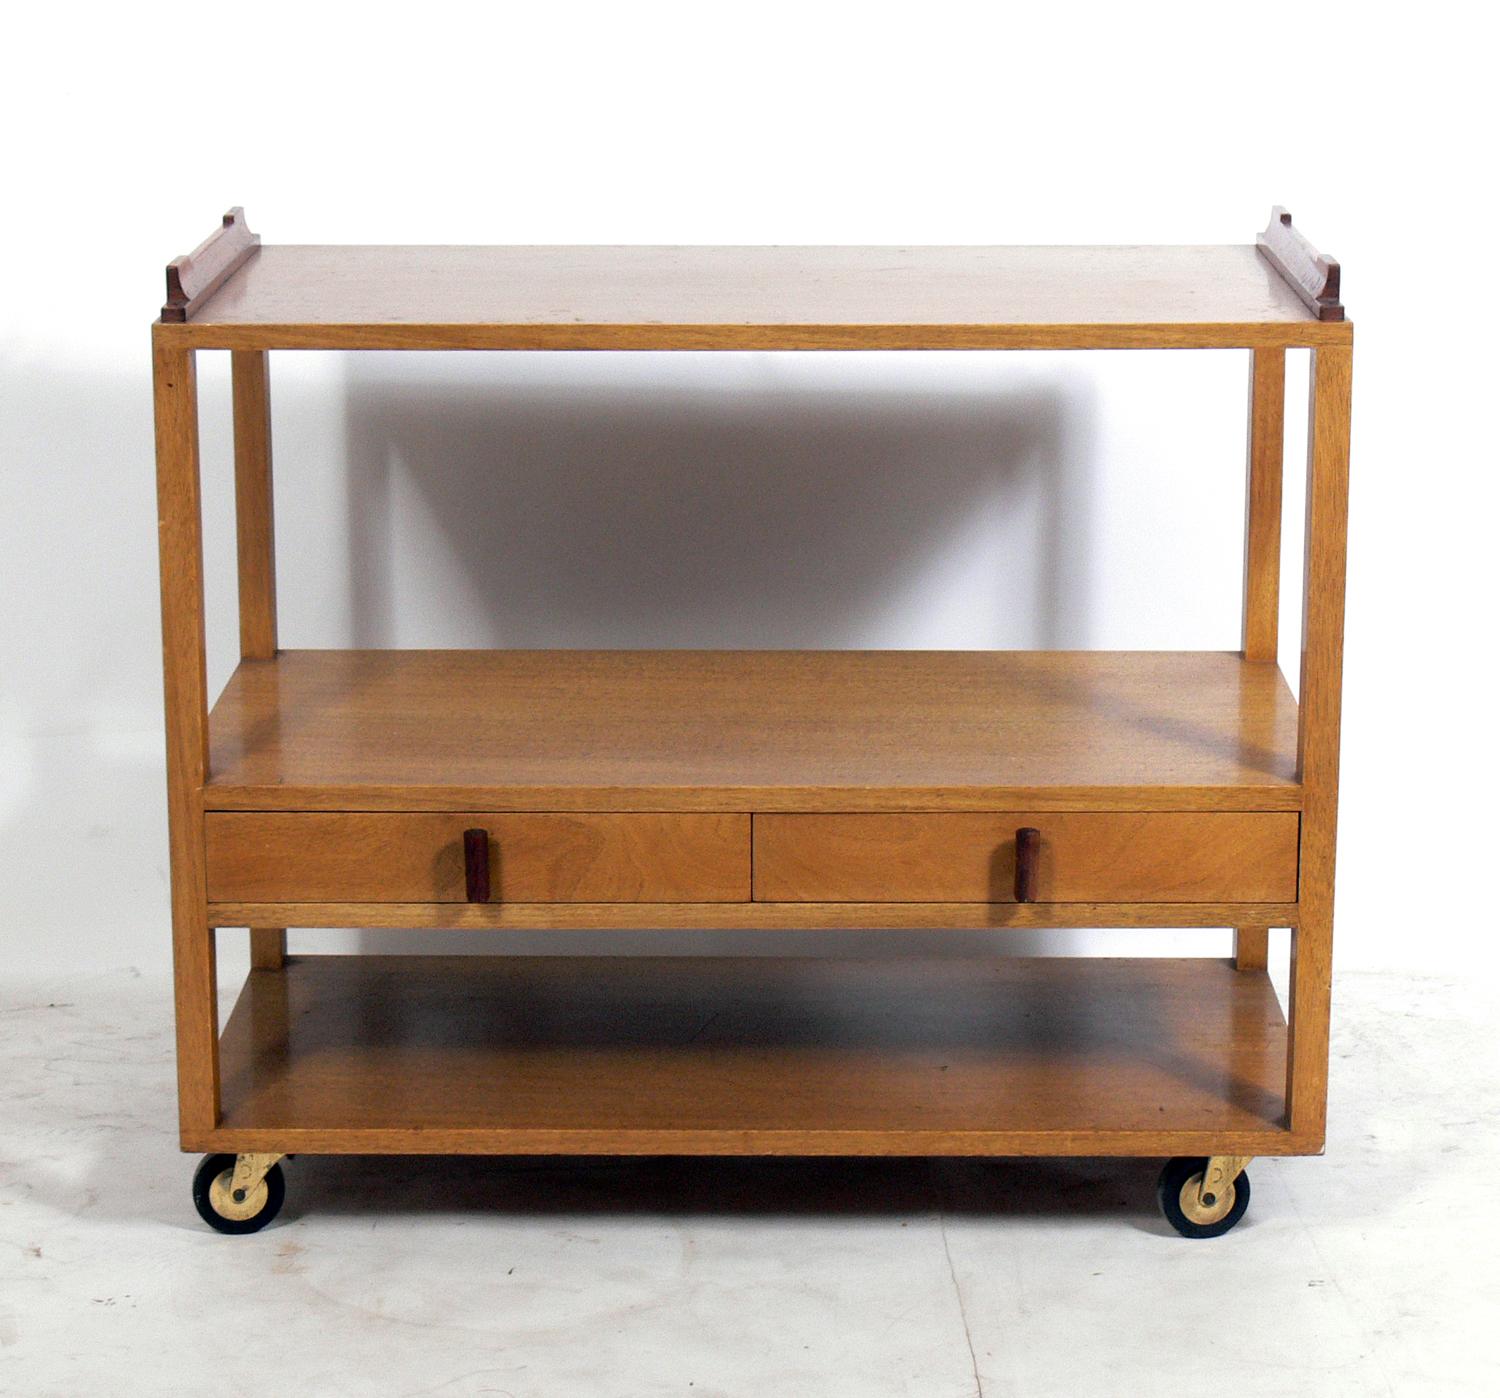 Clean lined bar or serving cart, designed by Edward Wormley for Dunbar, American, circa 1950s. This piece is currently being refinished and can be completed in your choice of color. The price noted includes refinishing in your choice of color. It is